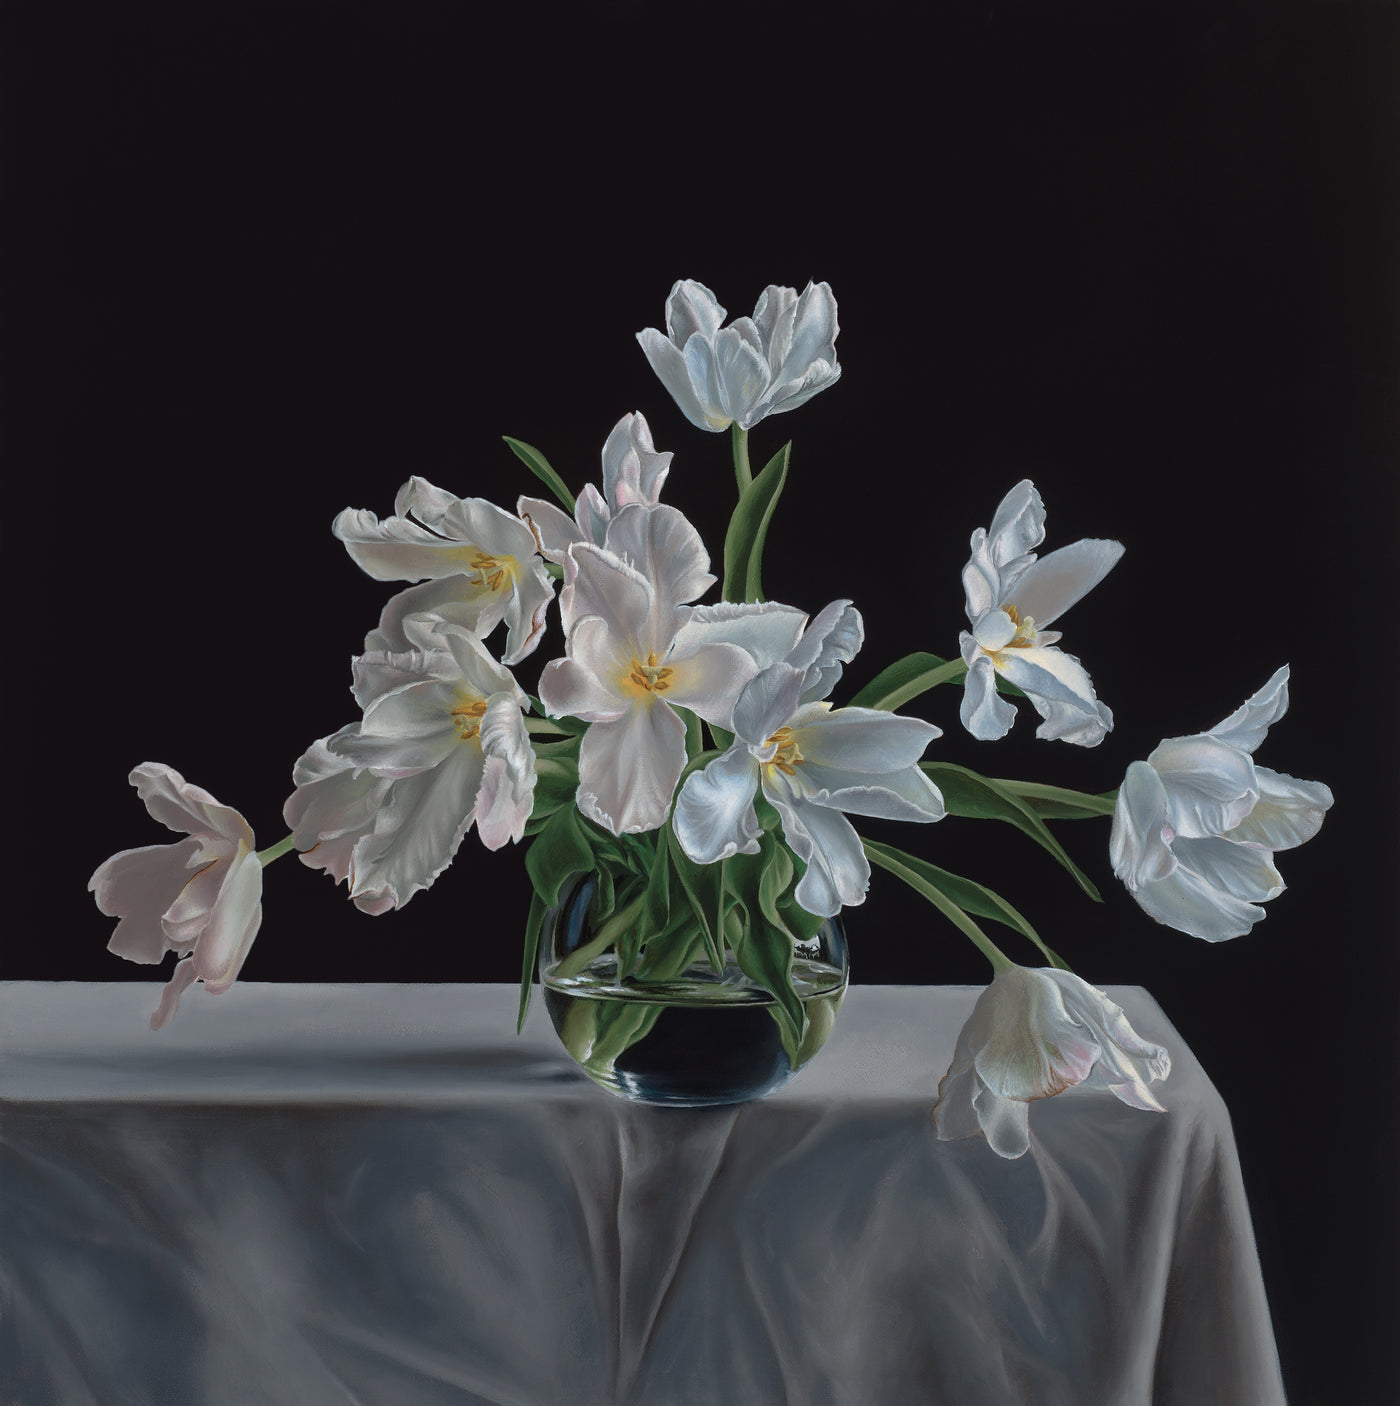 Marnie White - Tulips in Glass